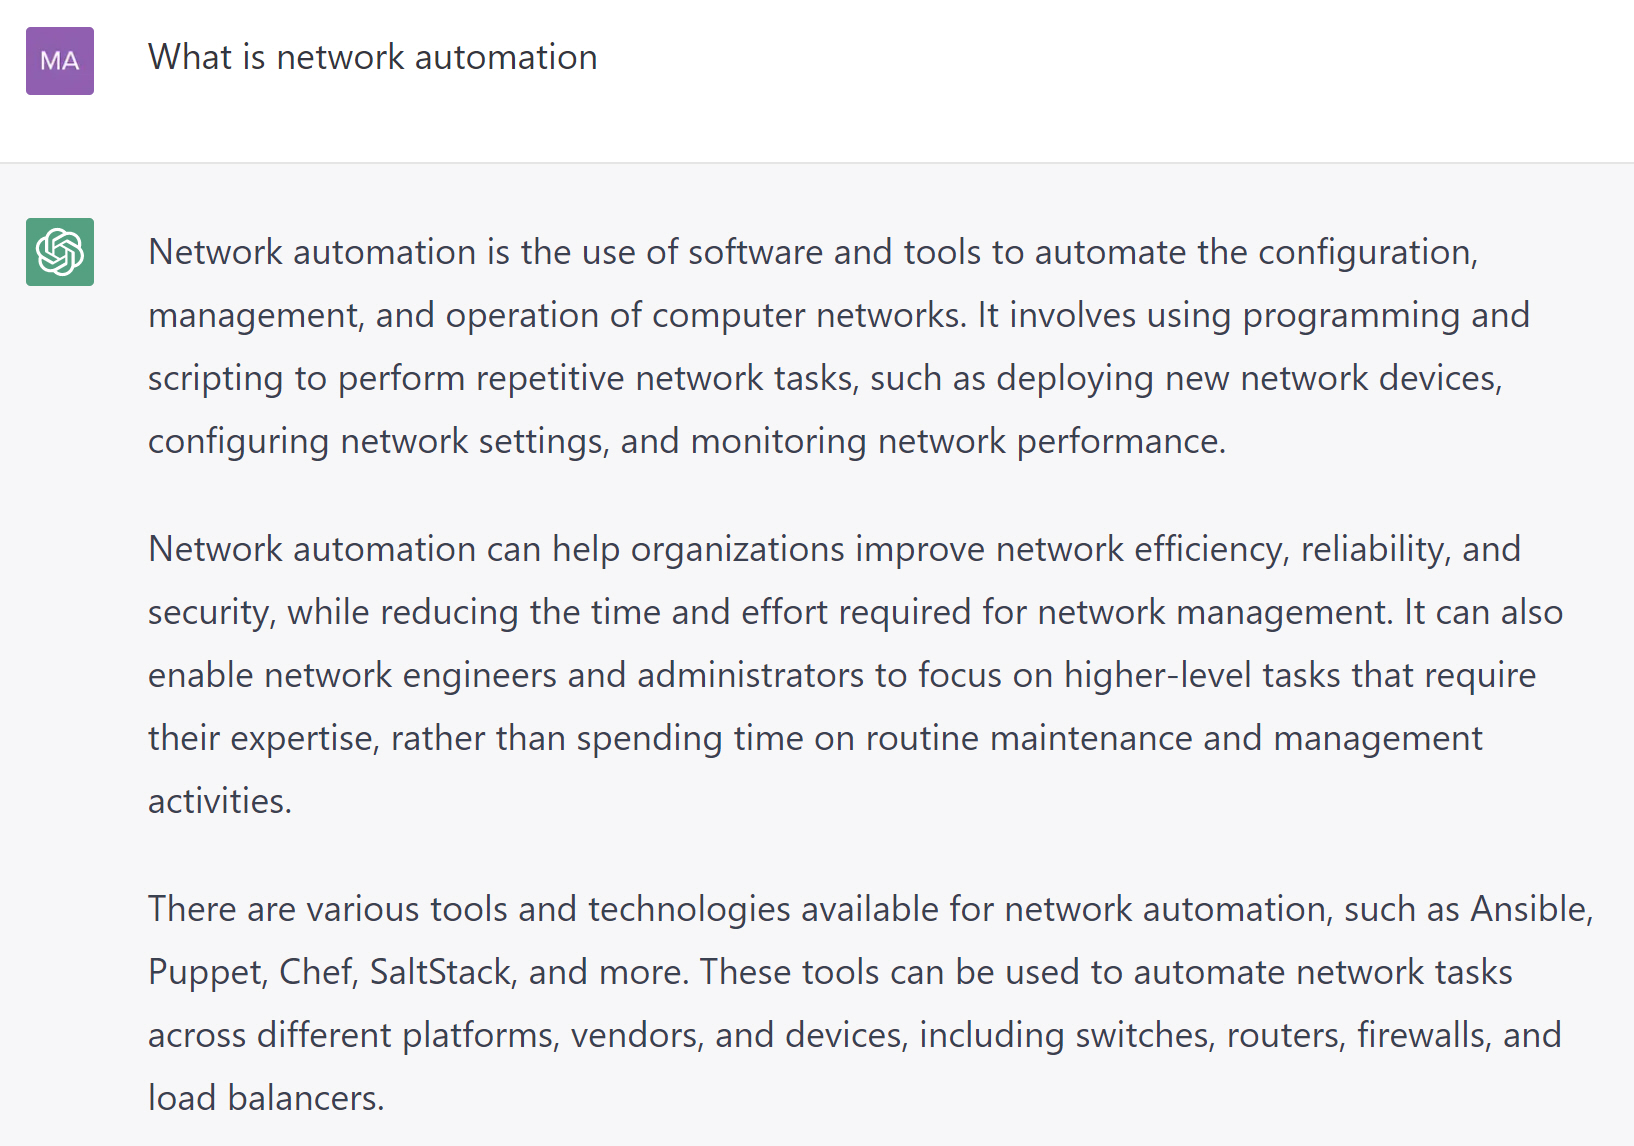 What is Network Automation according to AI